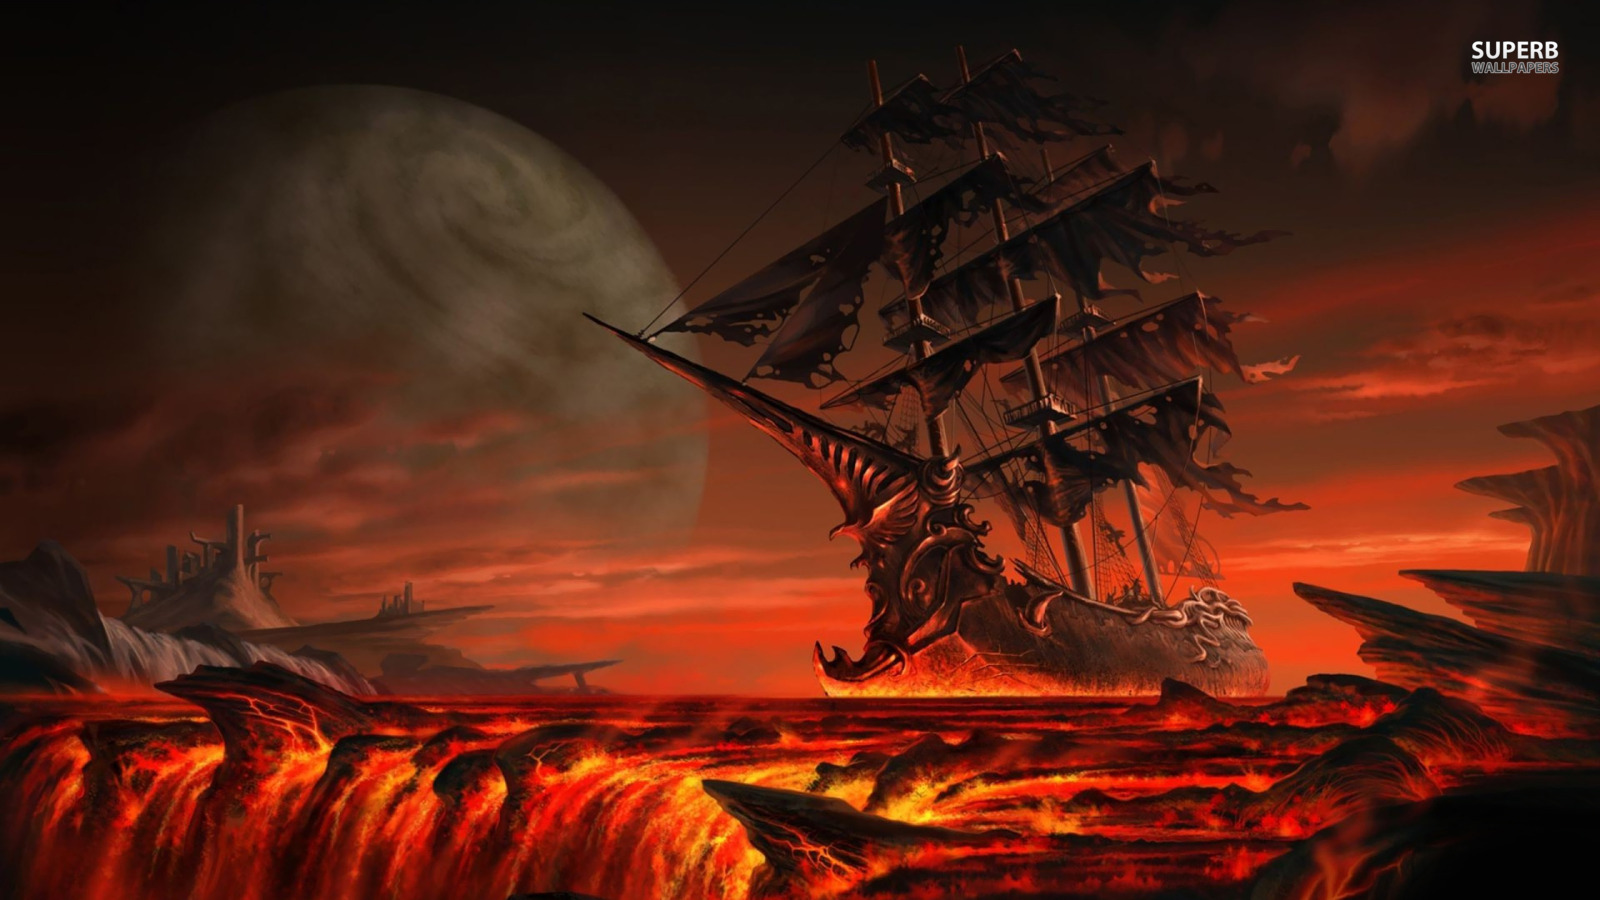 Pirates Image Ghost Ship HD Wallpaper And Background Photos